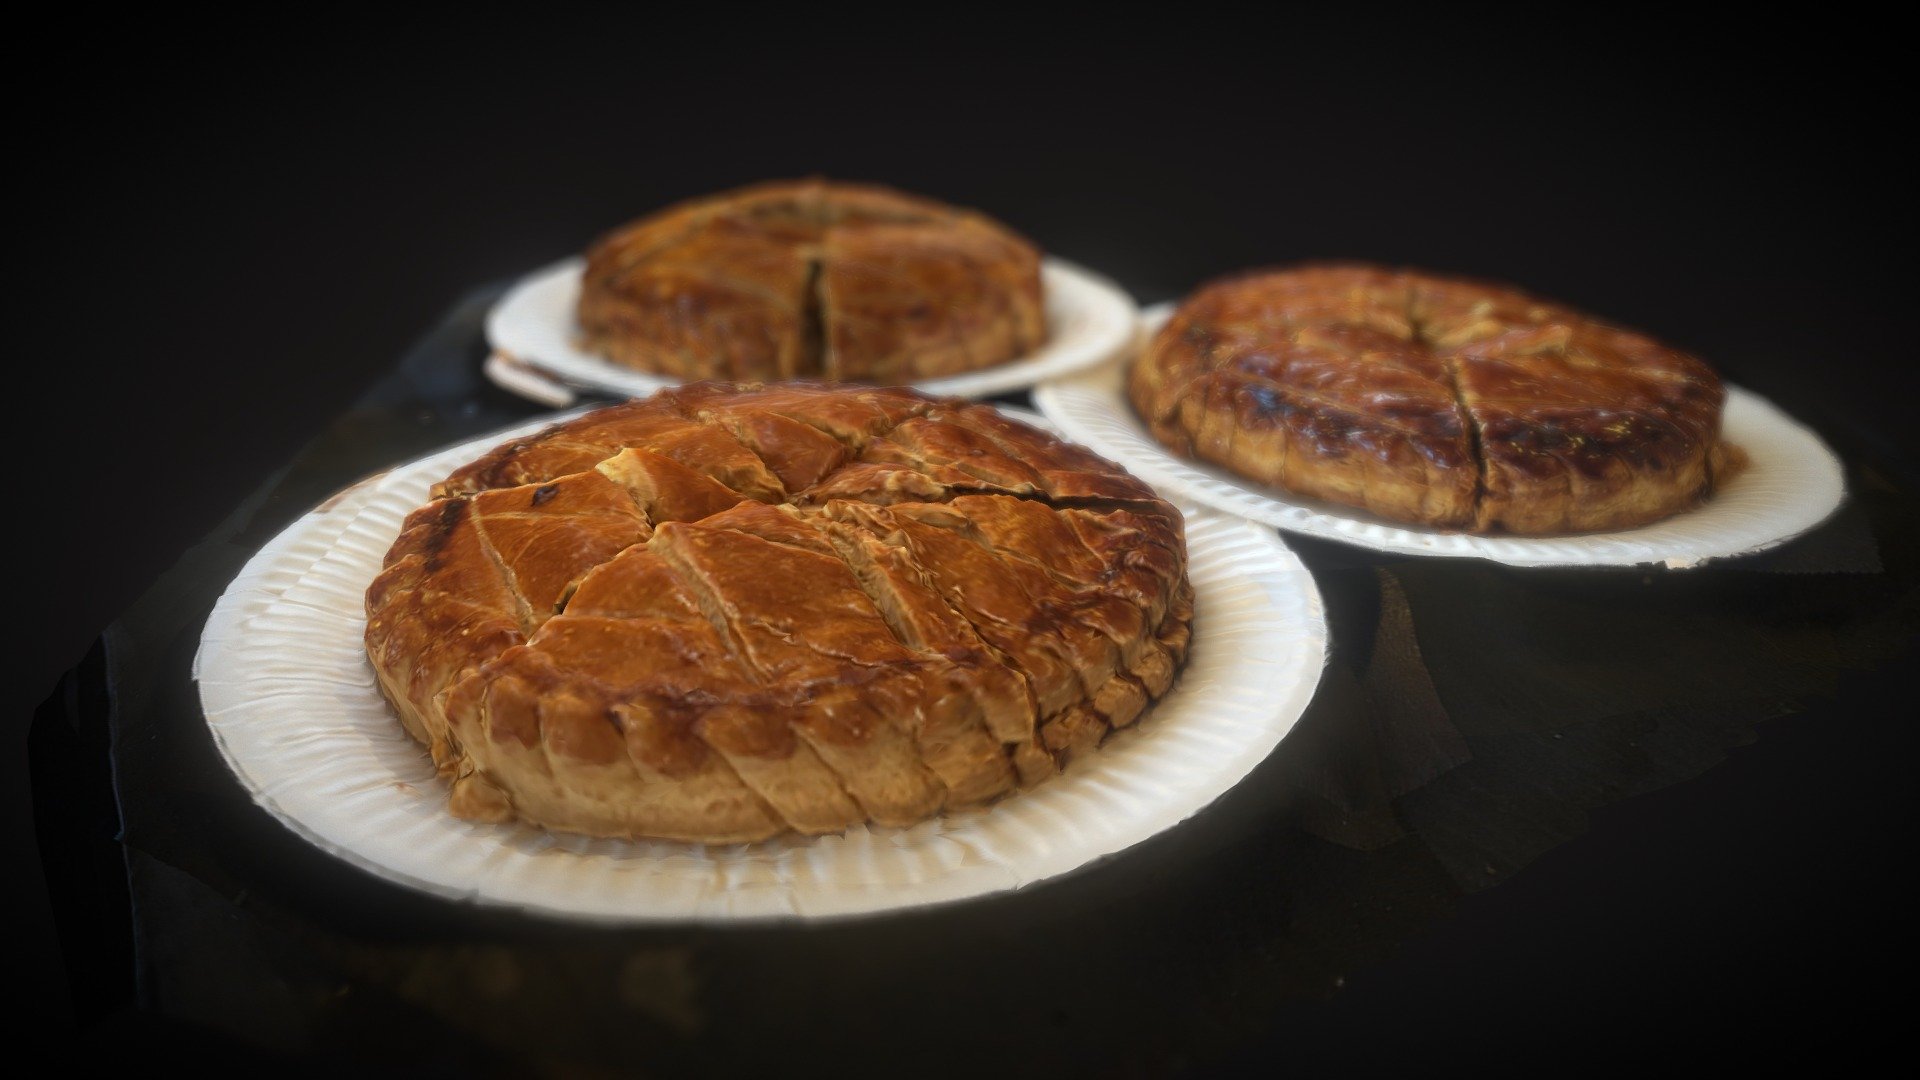 Today in Paris, the Sketchfab team shared the traditional galette des rois. Three lucky charms, three kings, one team.

————————————————————————————————————————————————————————————— 

DOWNLOAD — Also available for dowload: sketchfab.com/louis/store

8K texture attached as additional file.

Want to learn more about the technical details of this model? Use Sketchfab's model inspector. Protip, just press &ldquo;I